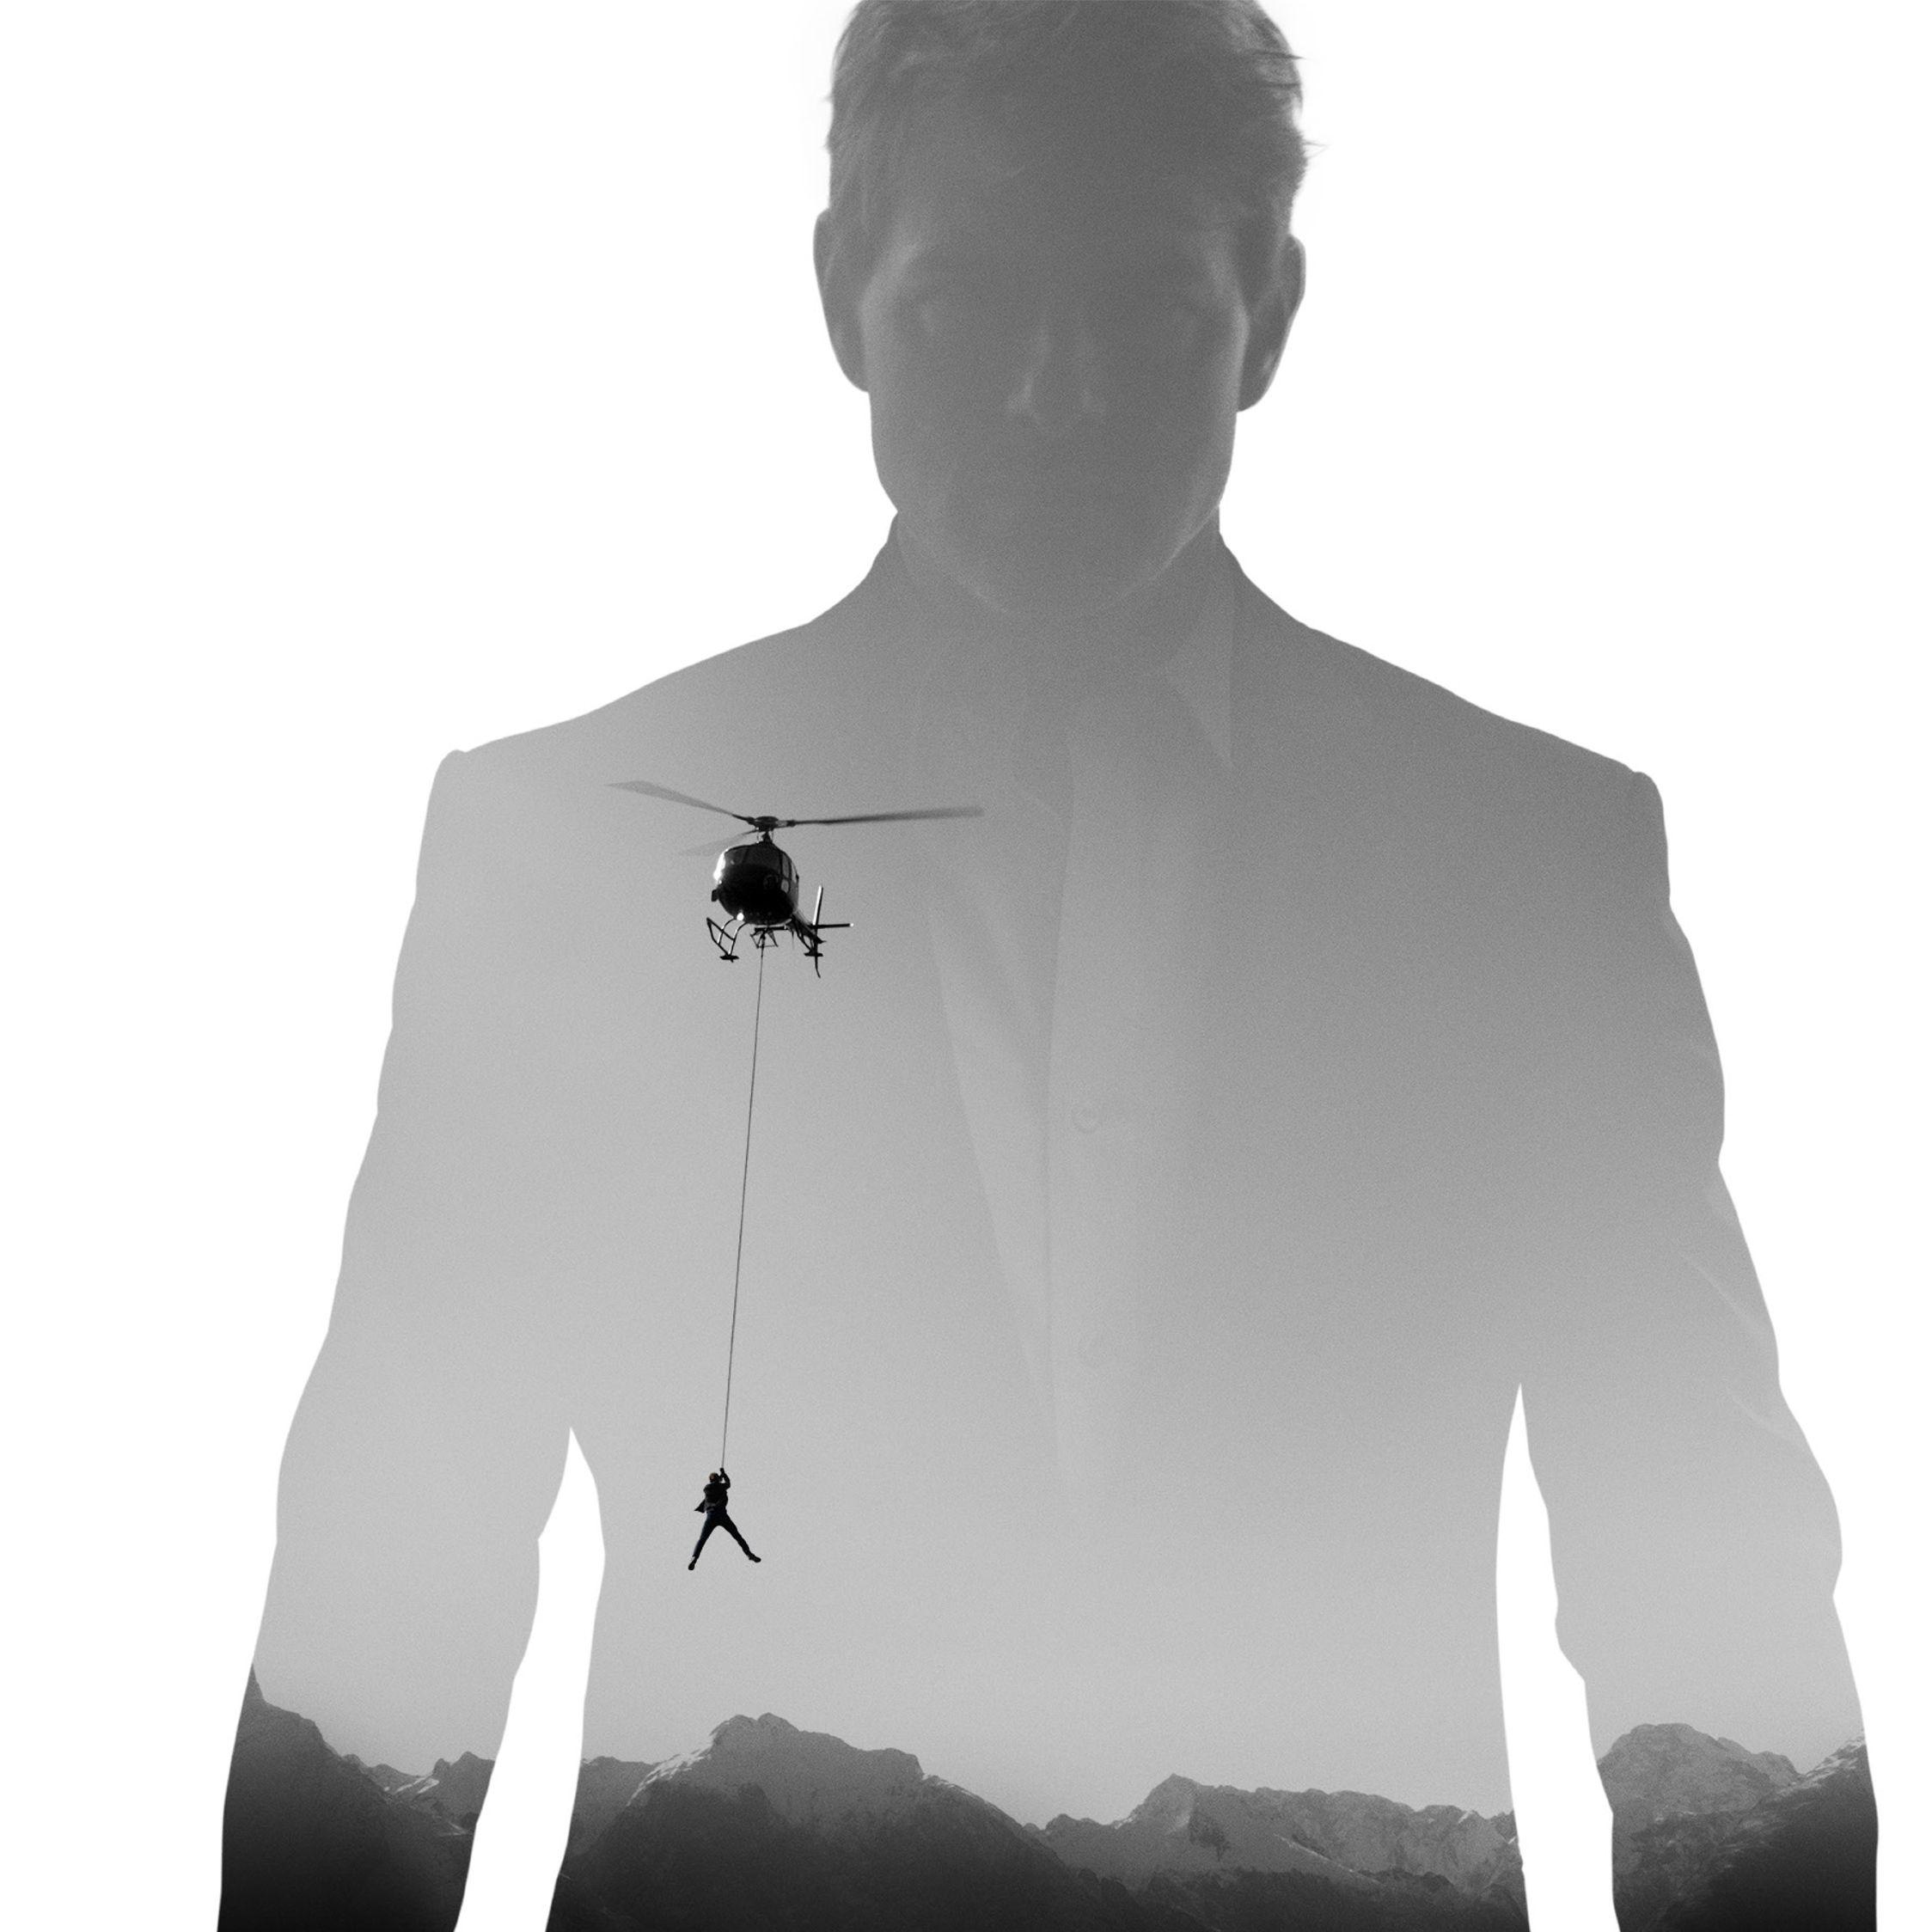 Download Mission Impossible Fallout 2018 2248x2248 Resolution, HD 4K